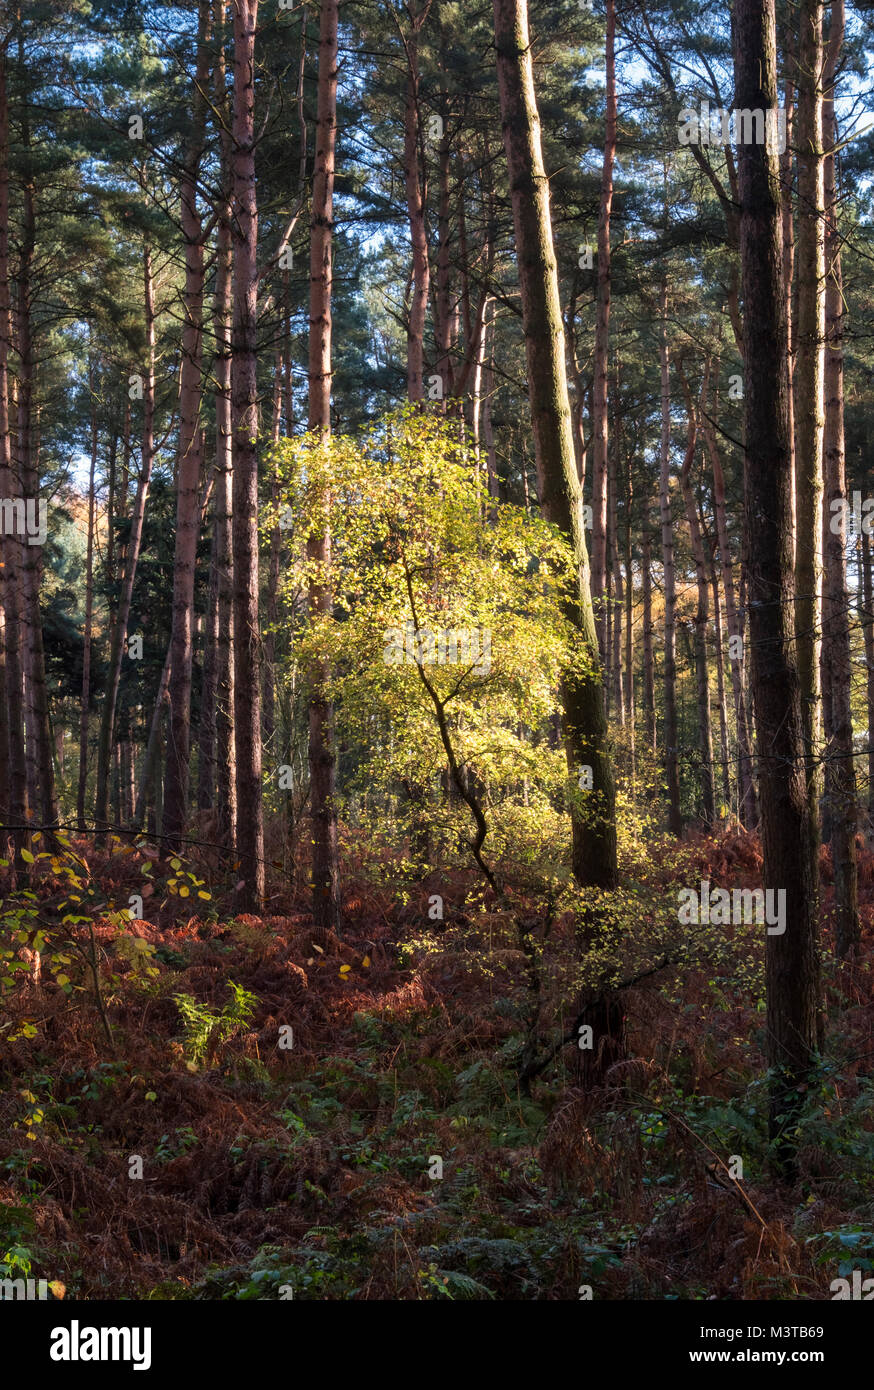 Forest Light, Beech Tree Sapling in autumn, Delamere Forest, Delamere, Cheshire, England UK Stock Photo